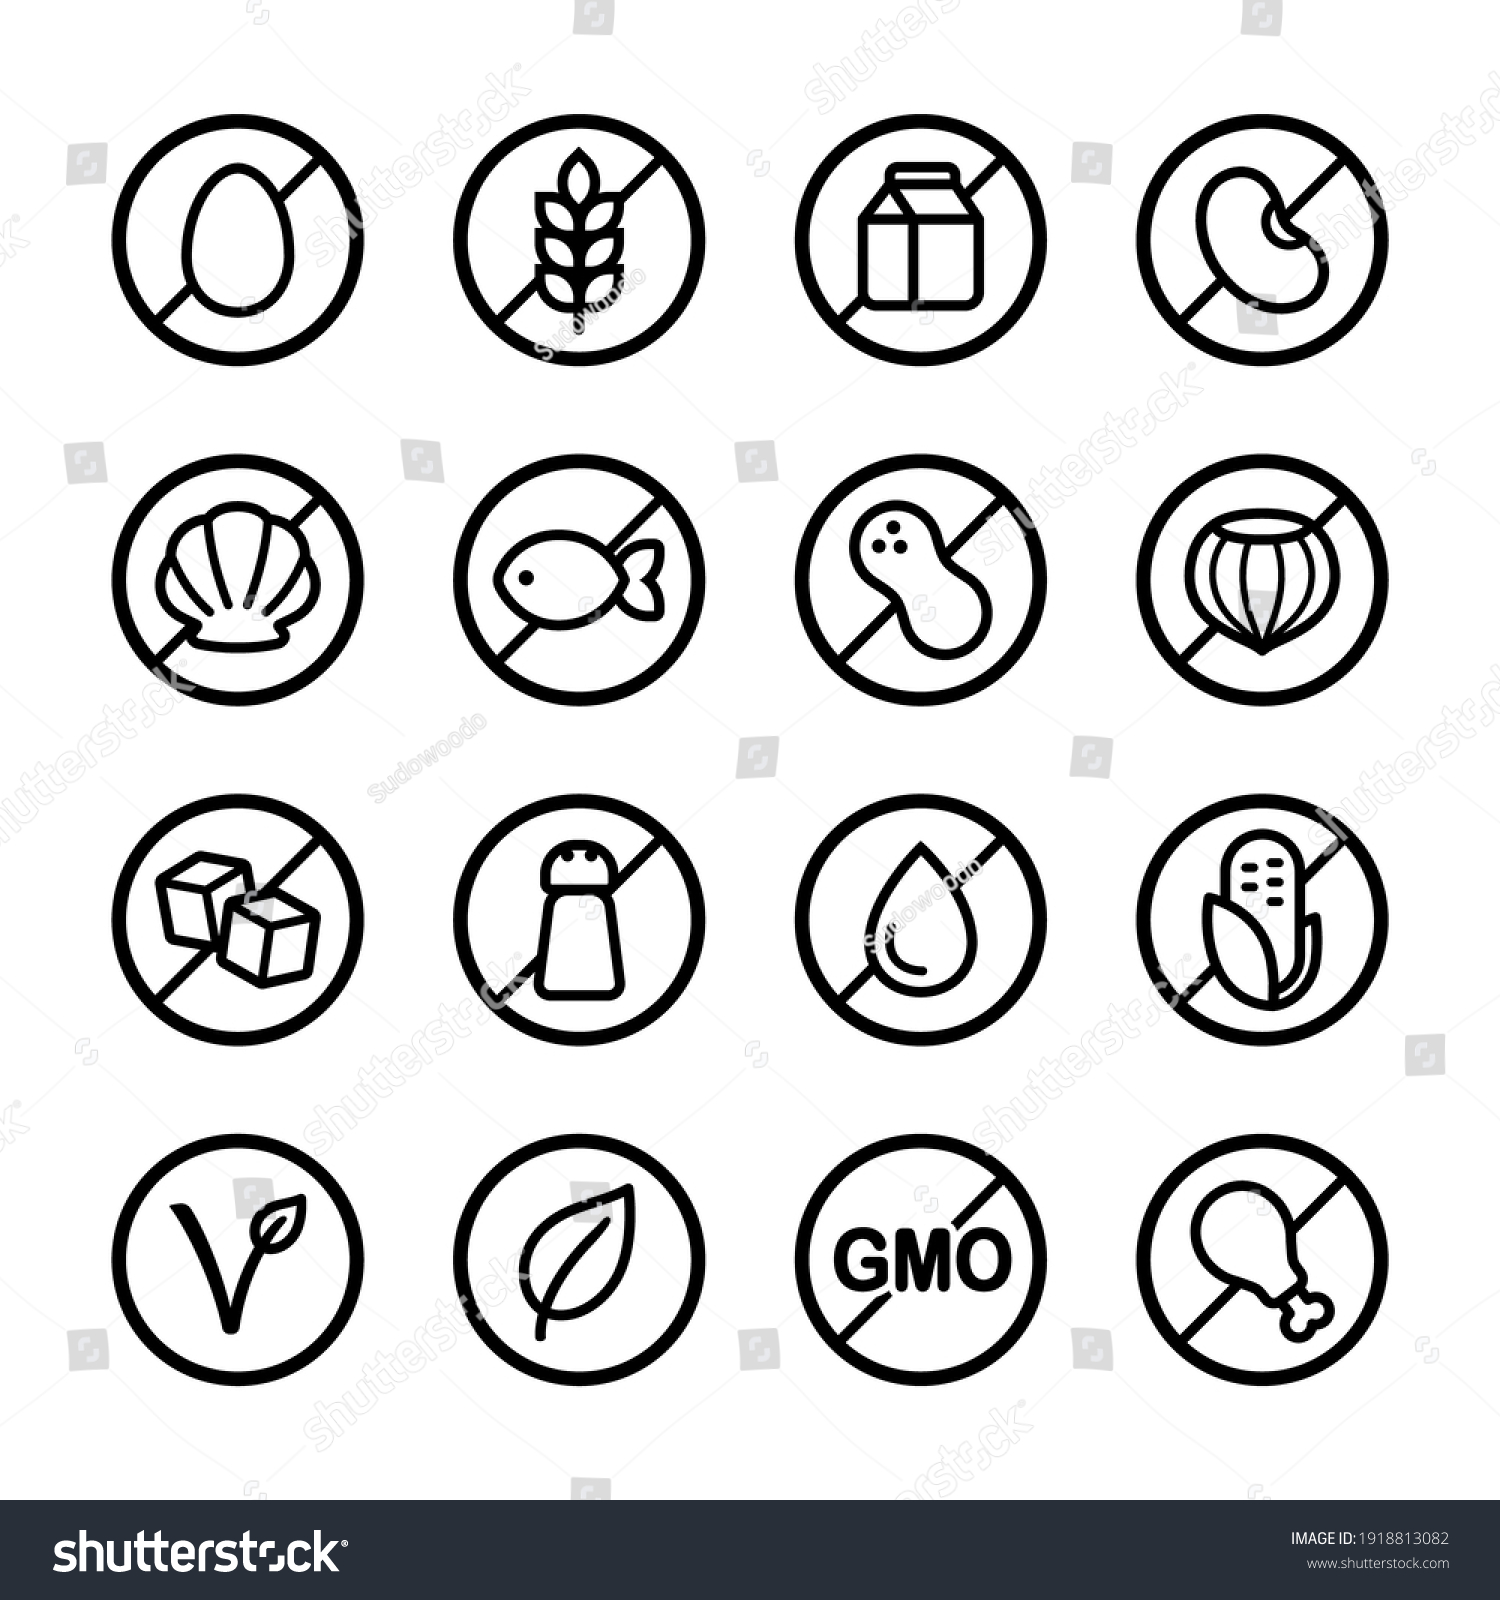 SVG of Set of ingredient and diet icons. Common allergens (gluten, dairy, soy, nut and more), sugar, salt and trans fat, vegetarian and organic symbols. svg